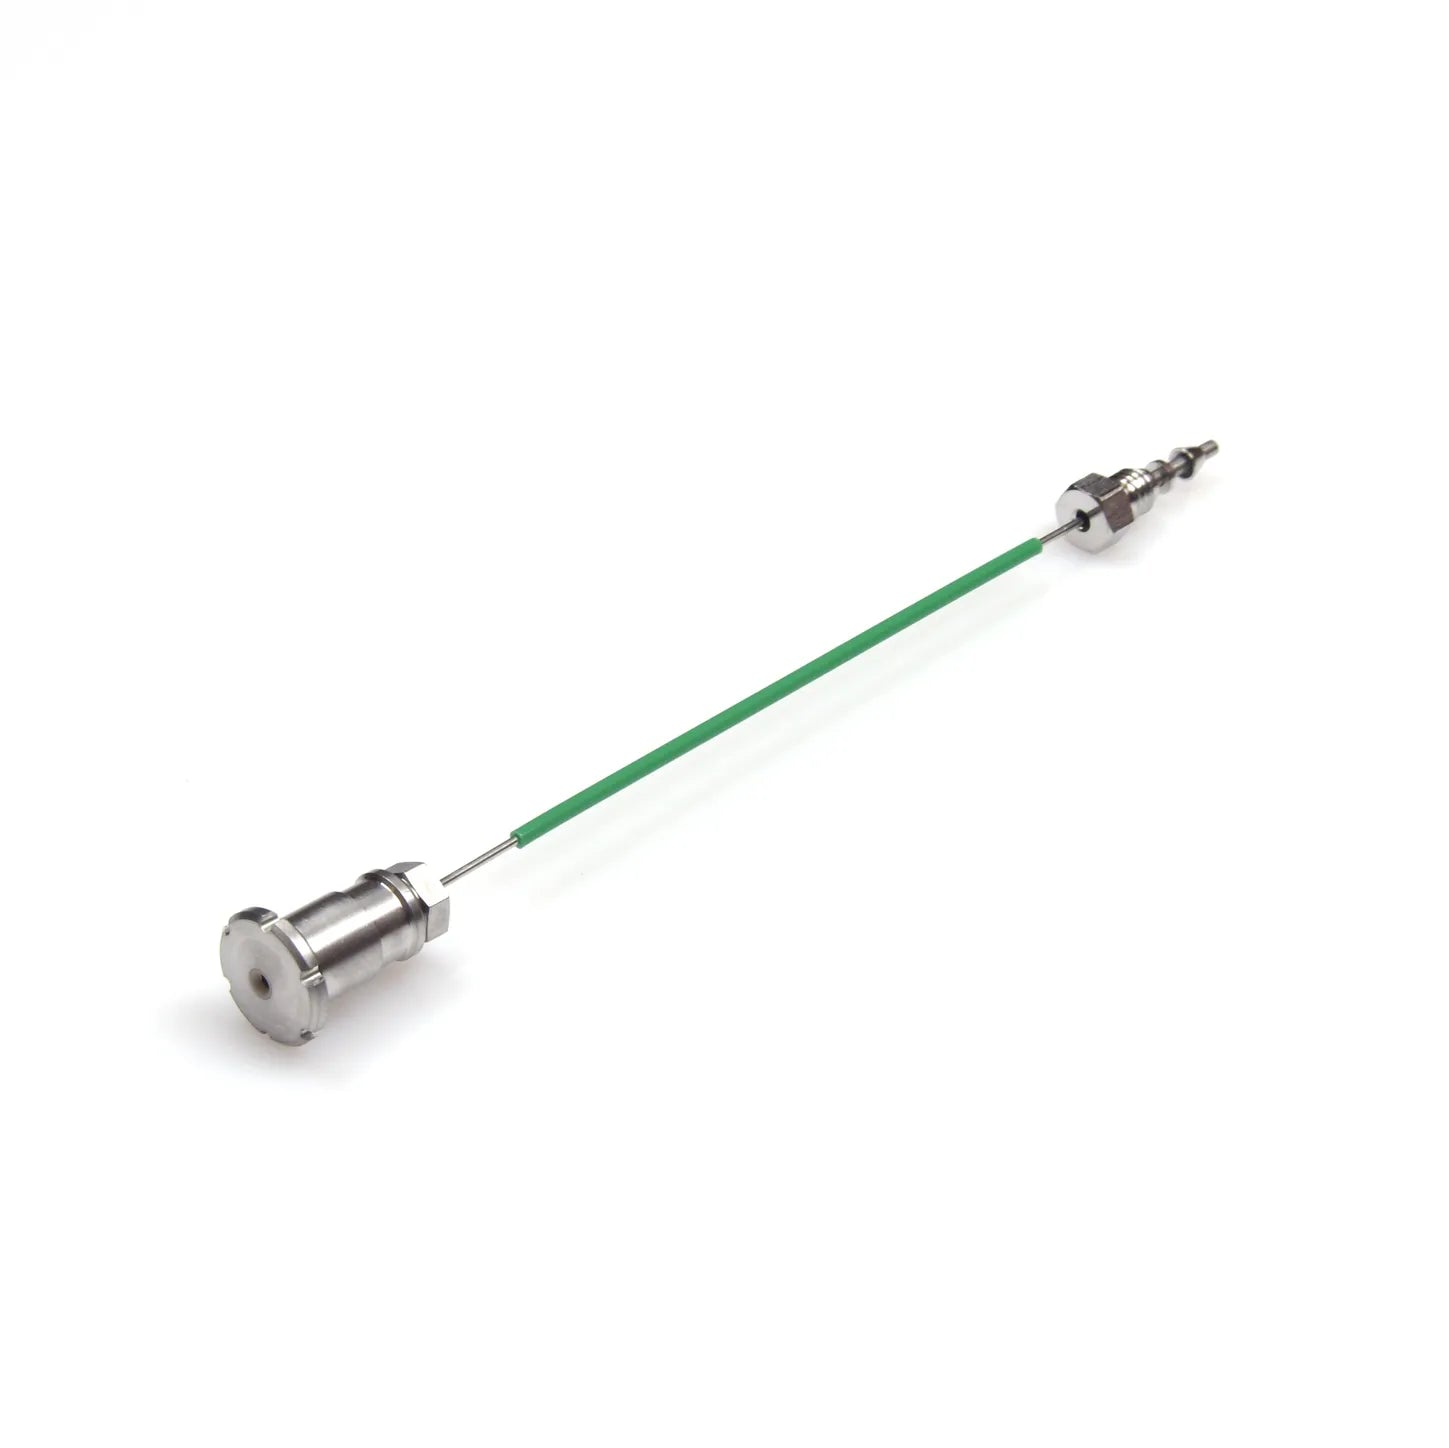 Needle Seat, PEEK™, 0.17mm ID, 1260, Comparable to Agilent # G7129-87017